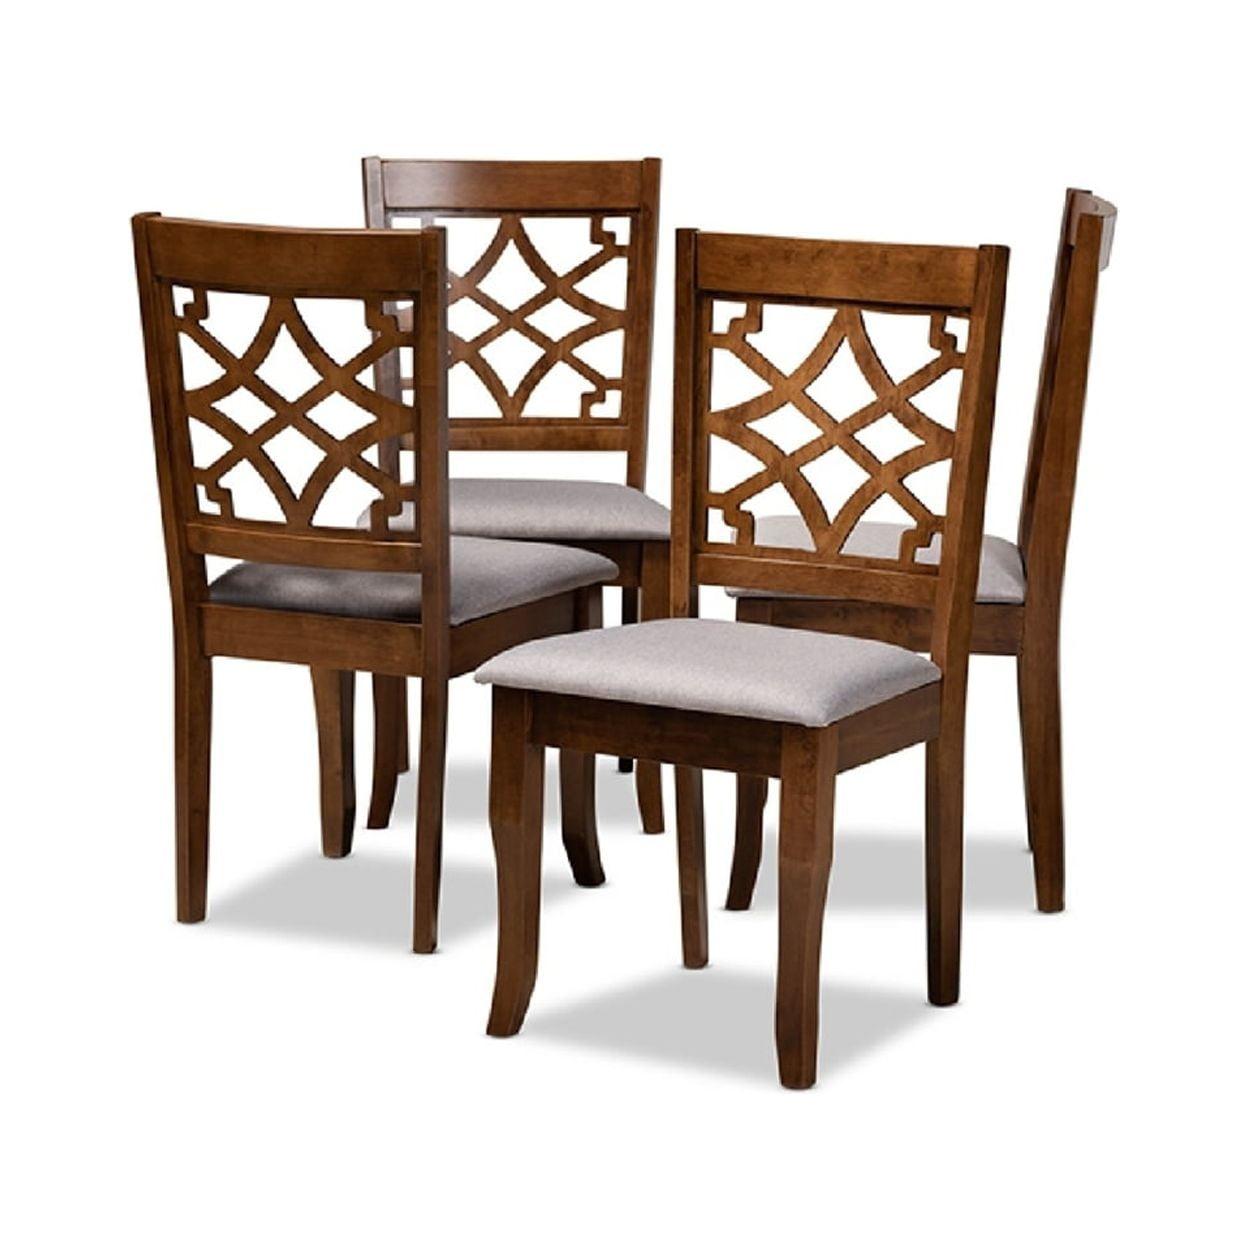 Walnut Brown & Gray Cane-Back Dining Chair Set of 4